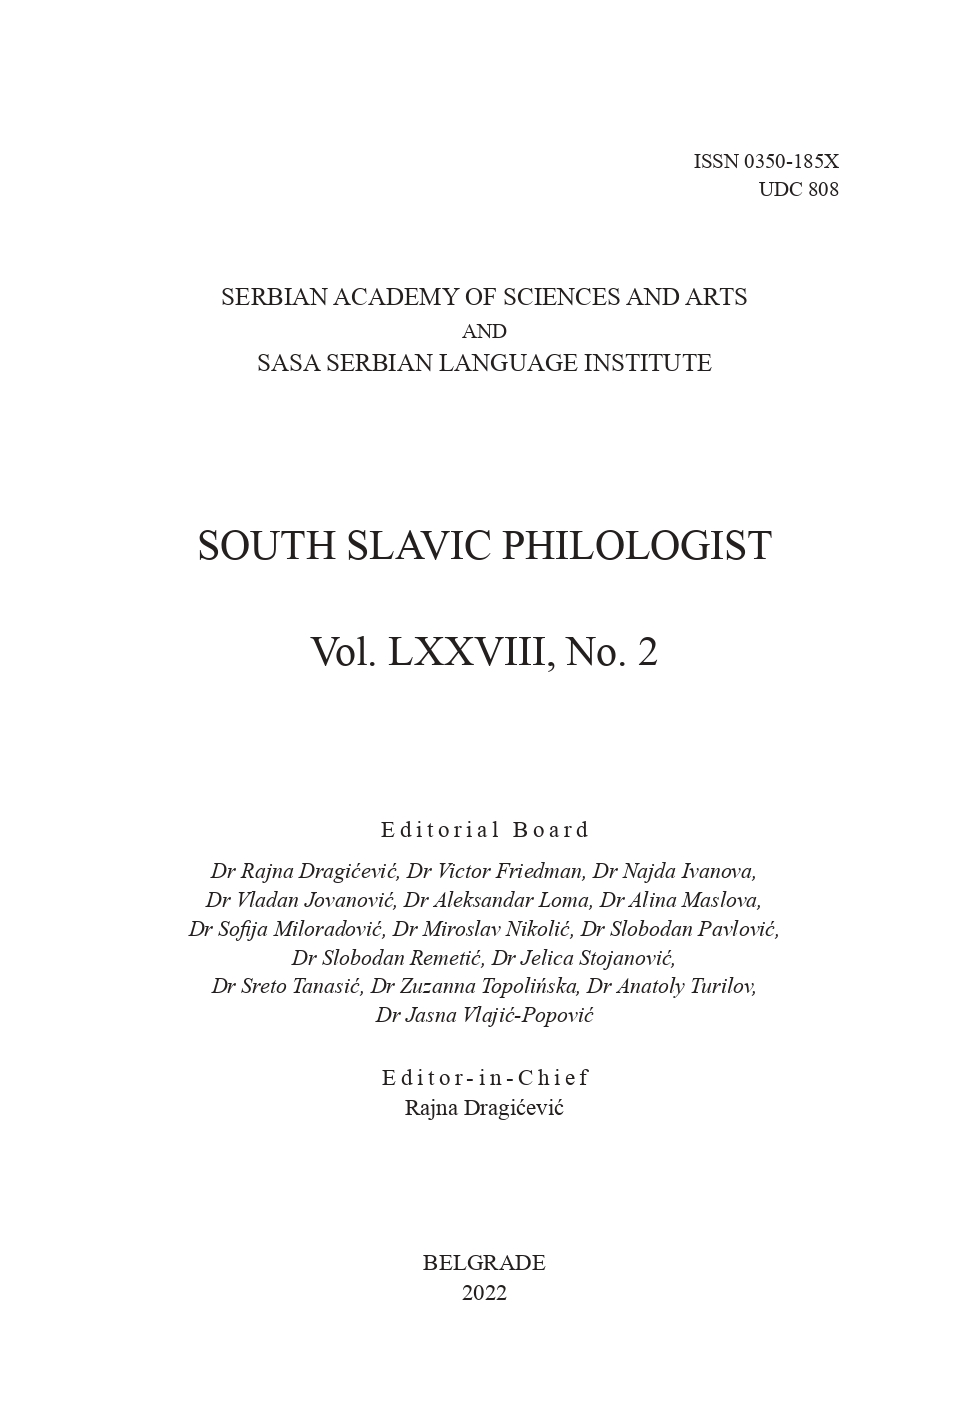 CHURCH SLAVONIC WORD-FORMATION ELEMENTS IN SERBIAN VERNACULARS (THE SUFFIX -IJE) Cover Image